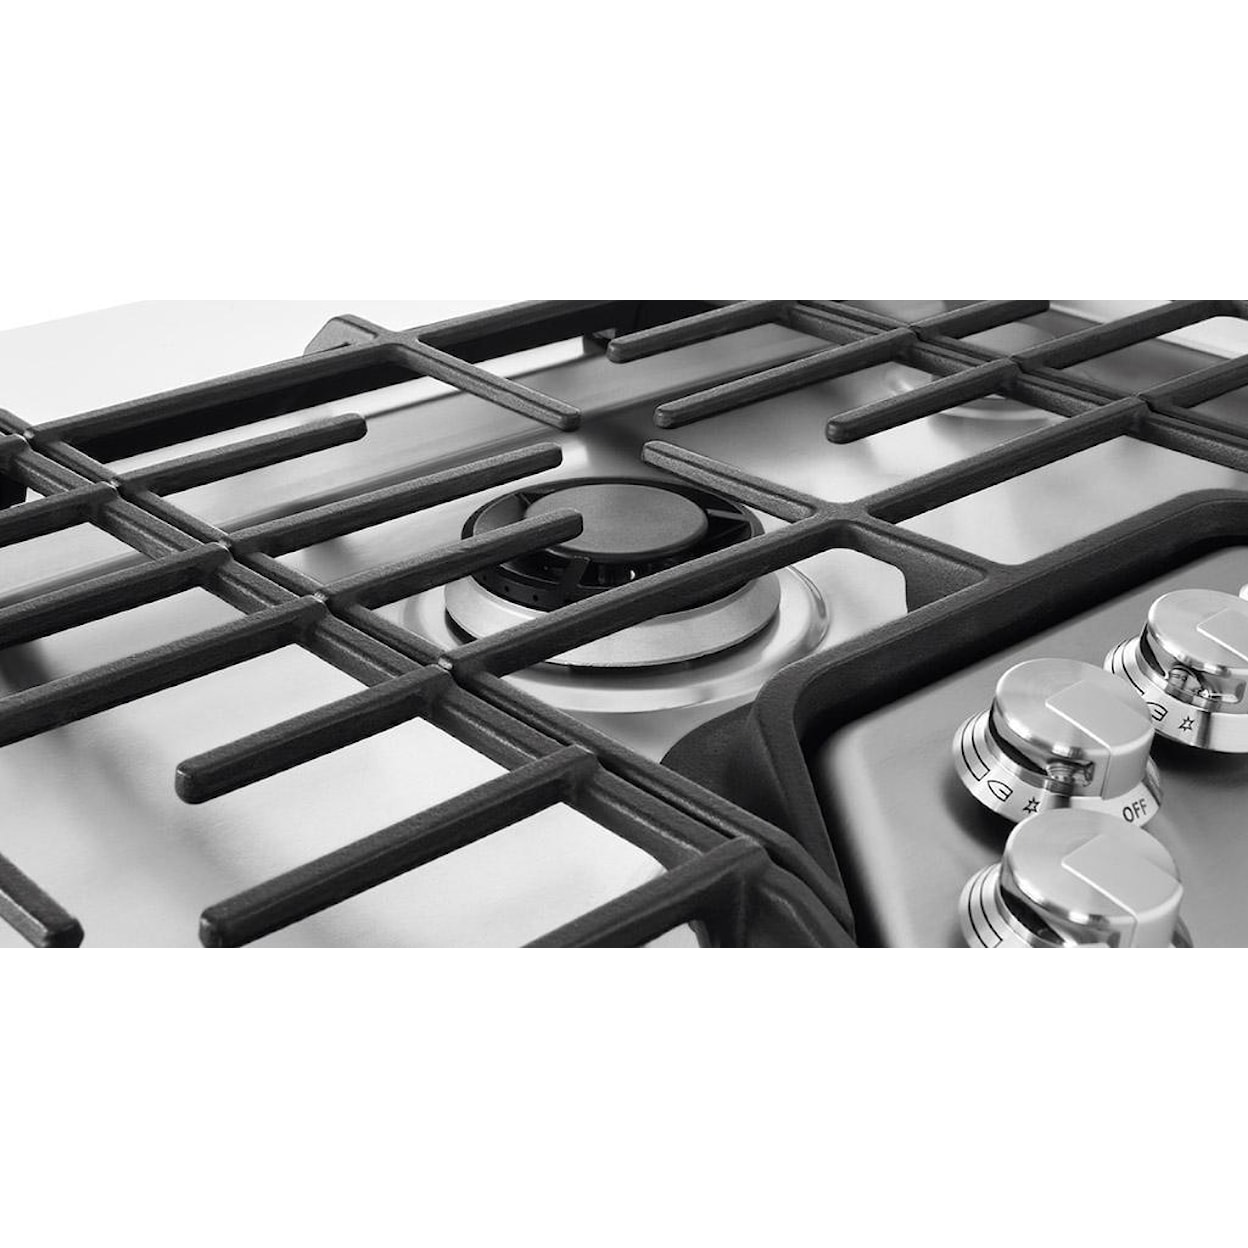 Electrolux Gas Cooktops 36" Gas Cooktop